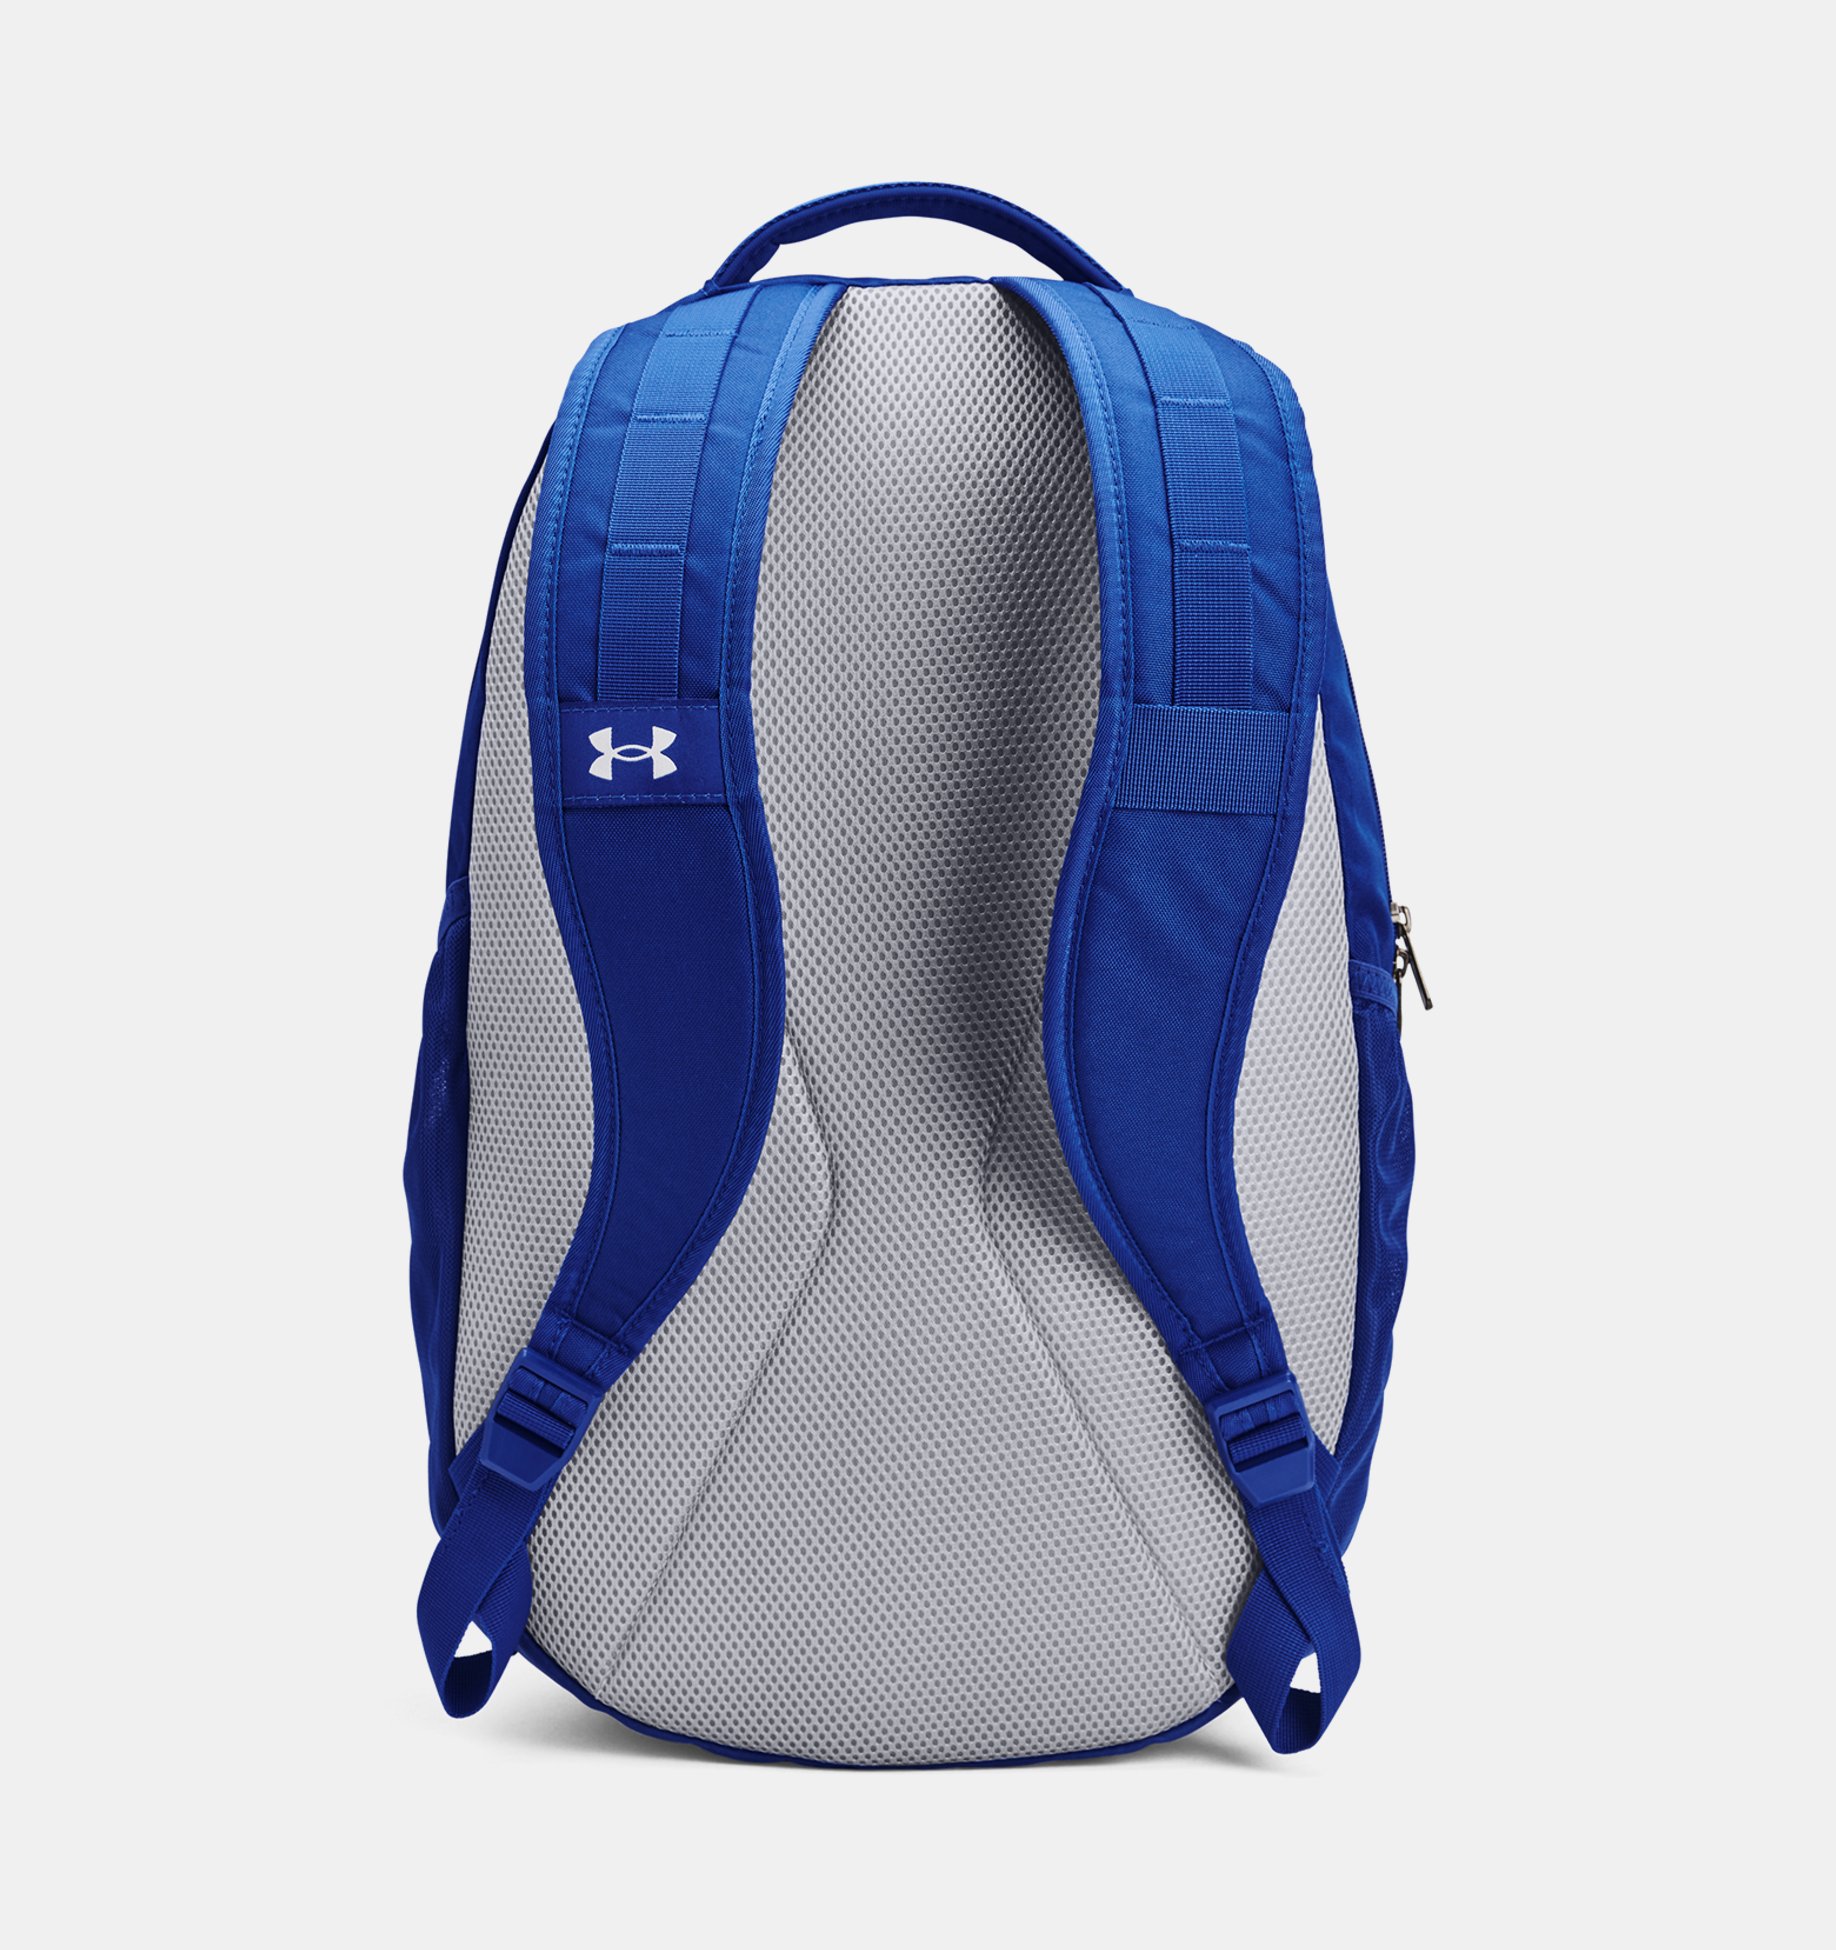 Under Armour Unisex Hustle 5.0 Backpack Durable and Comfortable Water Resistant Backpack Spacious Laptop Backpack 